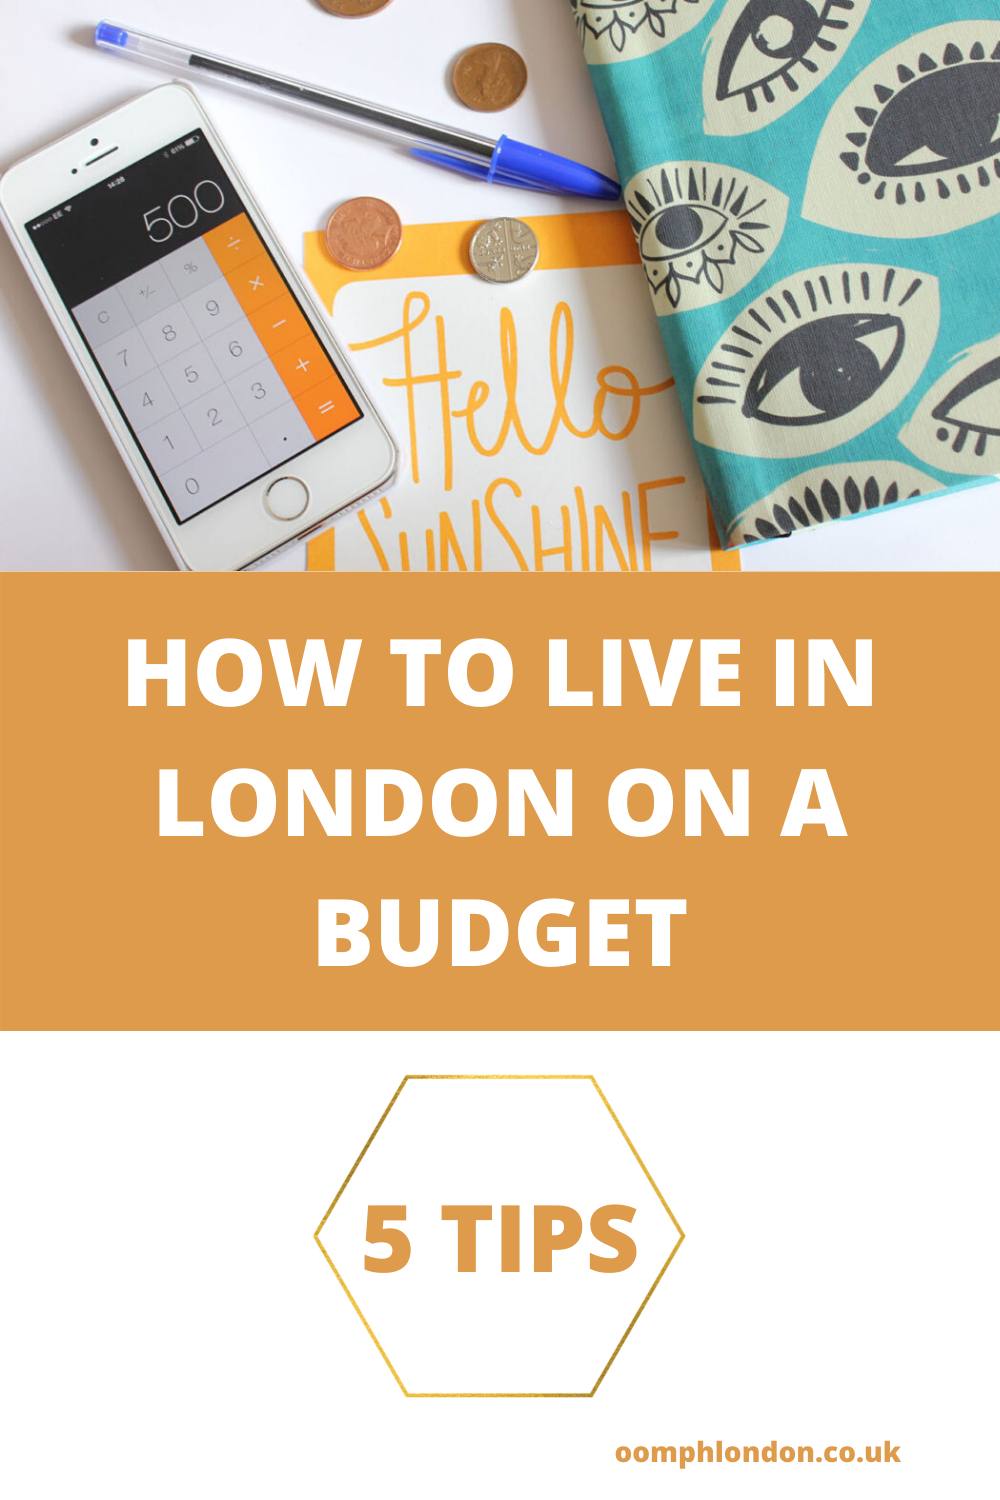 5 tips on how to live in London on a budget